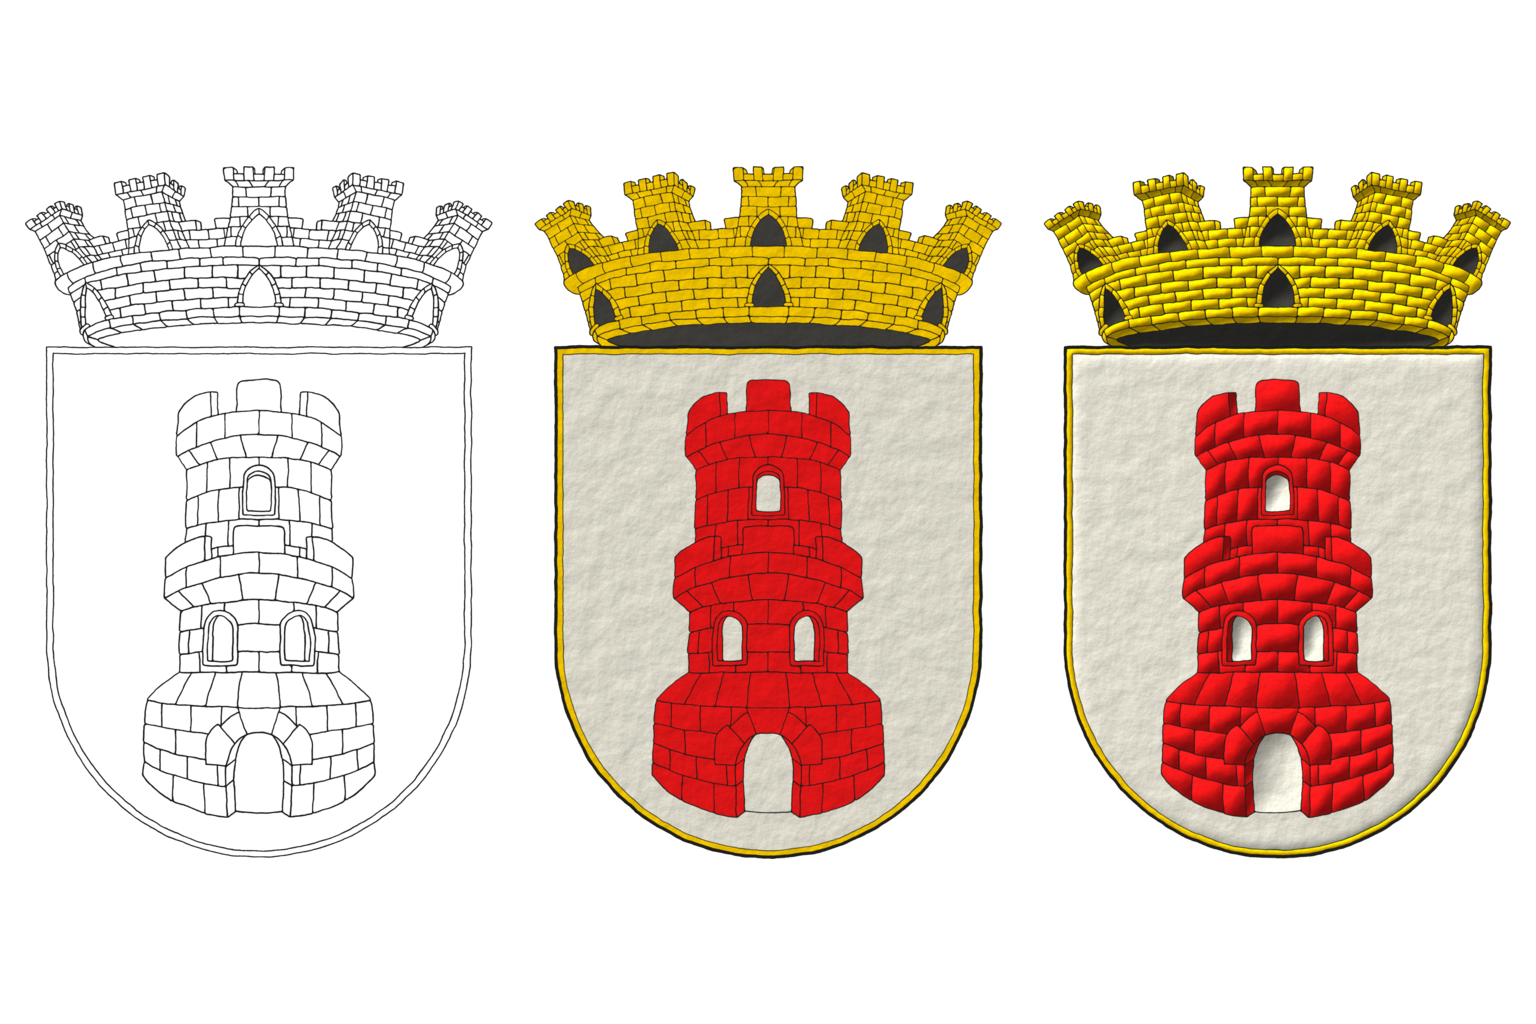 Argent, a tower with a turret Gules, port and windows Argent. Crest: A mural crown Or.